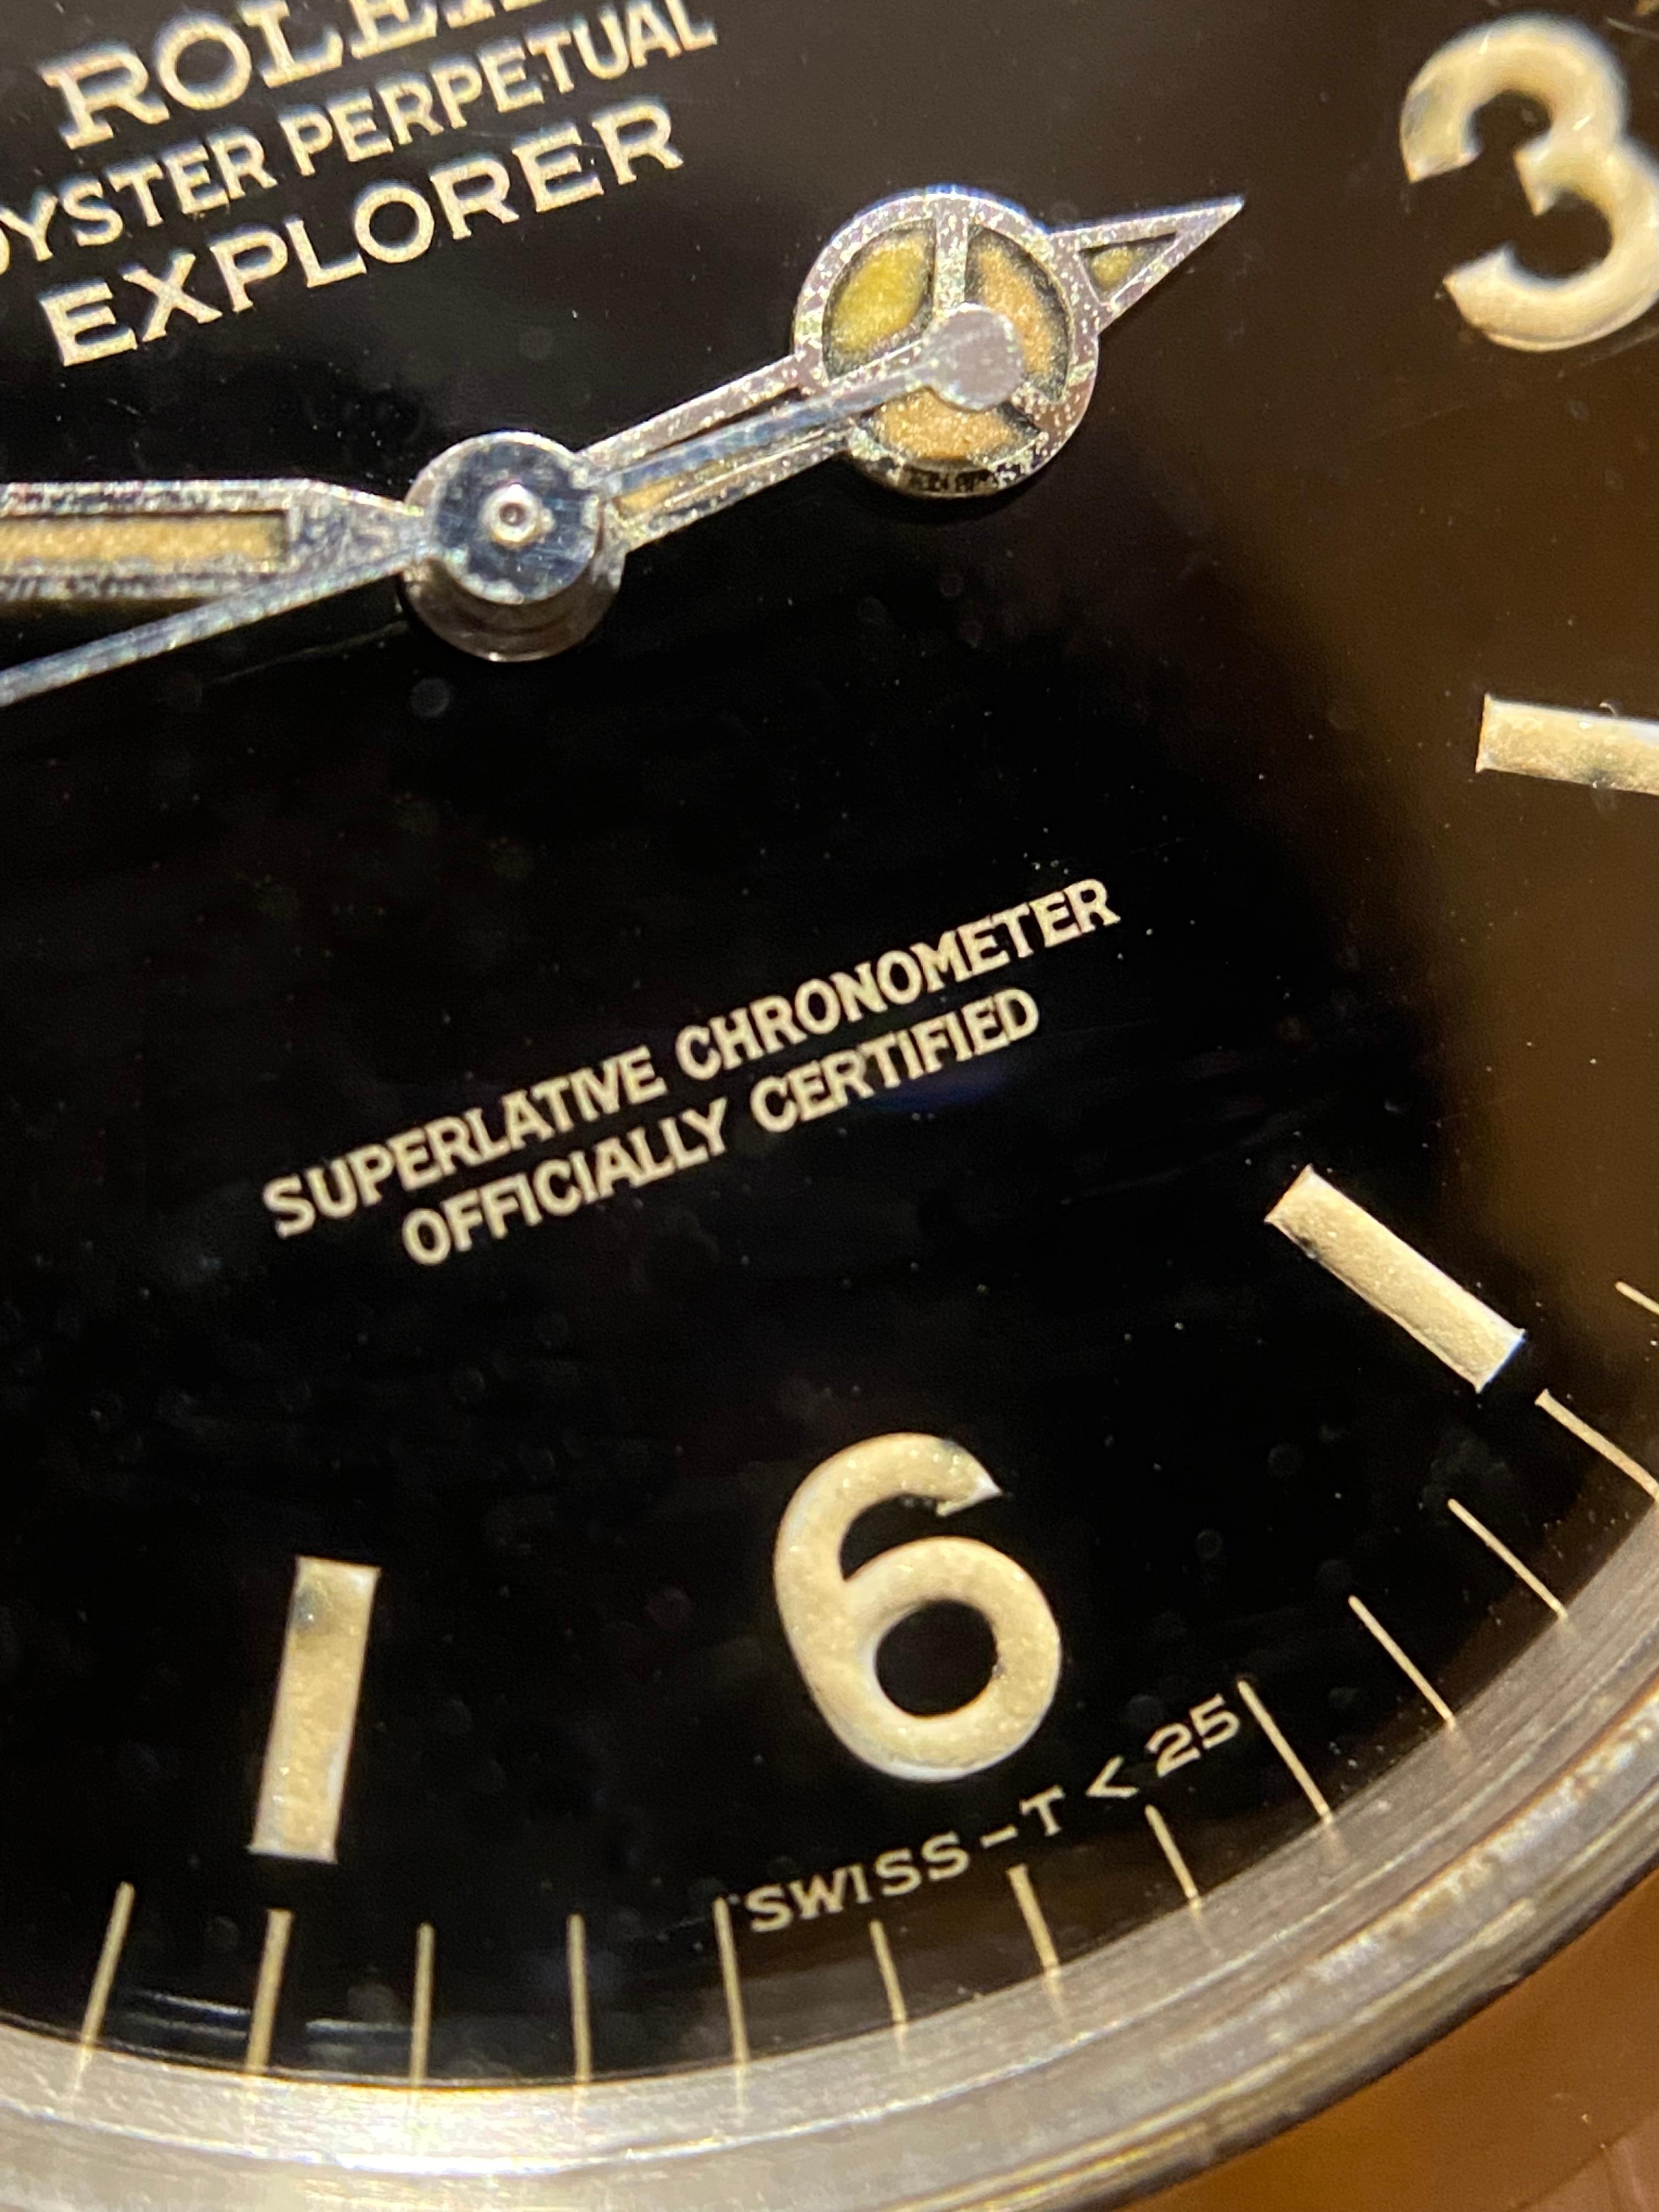 Rolex Oyster Perpetual Explorer Gilt Glossy Dial 1016 Steel Automatic Watch 1966 3